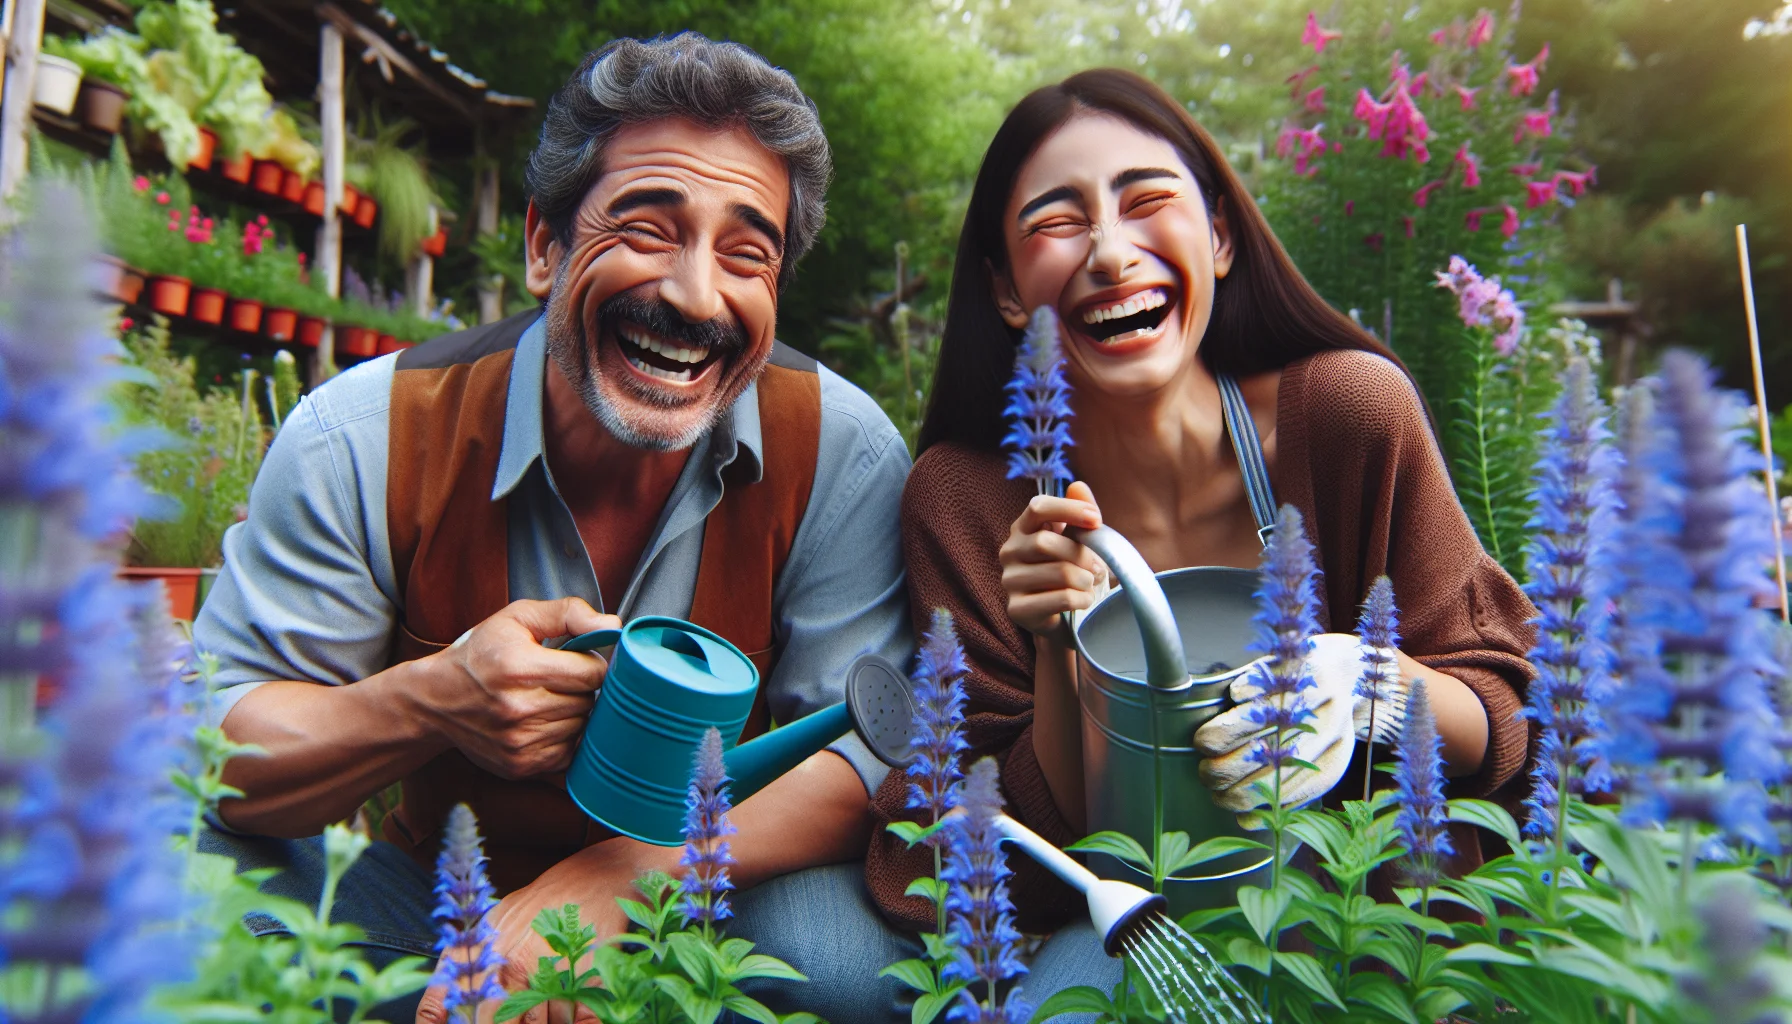 Imagine a humorous scene in a lush garden filled with vibrant, beautiful blue salvia flowers. Prospective gardeners, a middle-aged Hispanic man showing the gentle touch necessary for tending the plants and a young South Asian woman laughing as she waters them too much, are captured in the act of gardening. They are delighting in the unpredictability and adventures that come with taking care of plants. Their faces are beaming with joy and amusement around the salvia, making gardening appear as a heartwarming and fun activity.